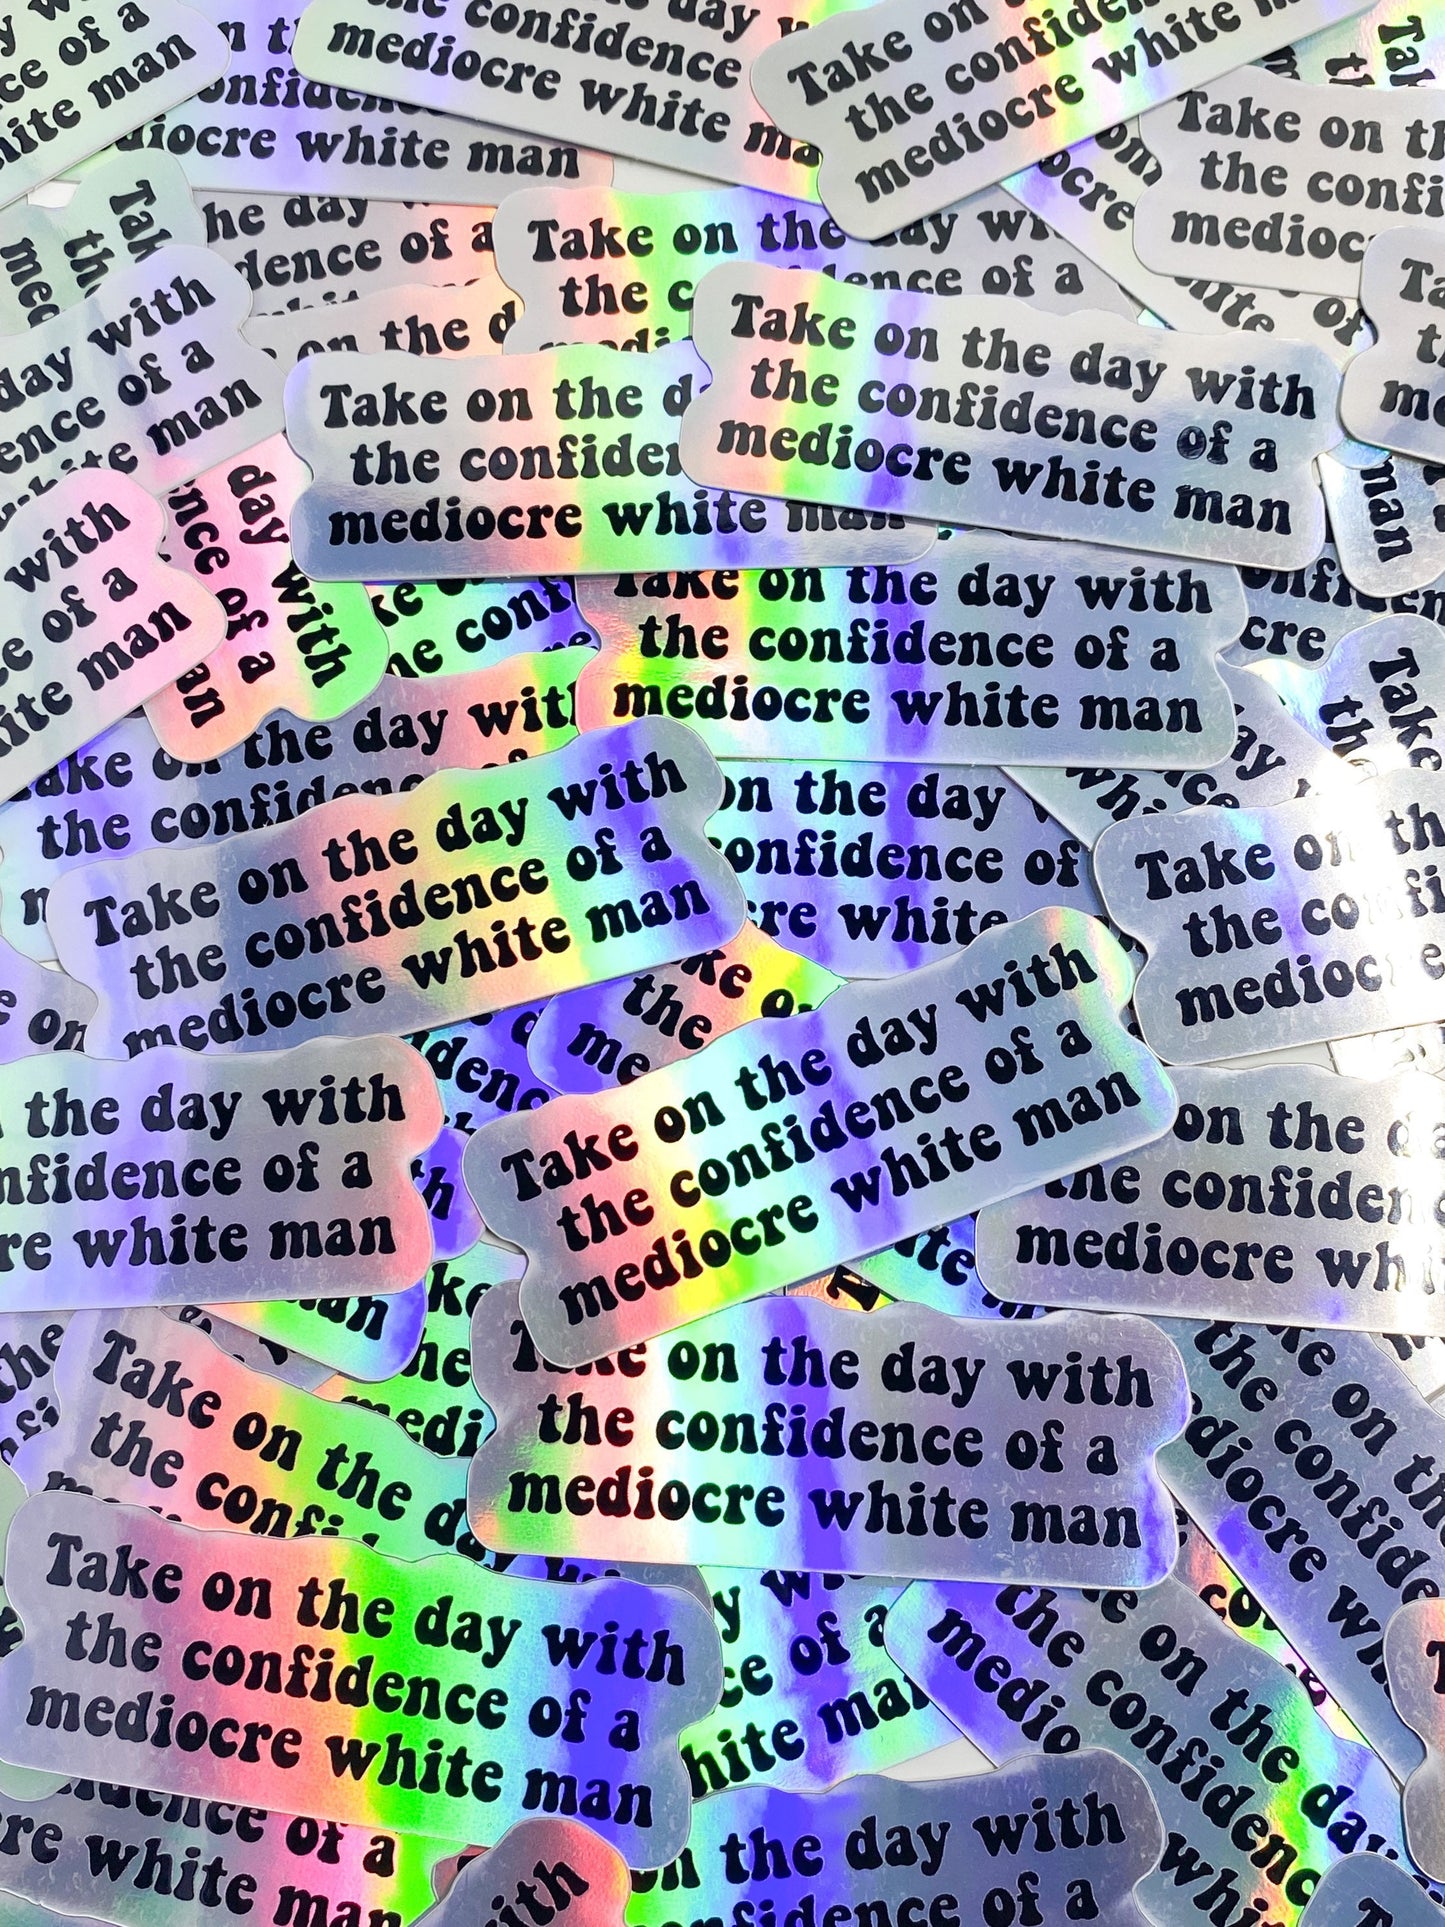 Take On The Day With The Confidence of a Mediocre White Man Holographic Vinyl Sticker